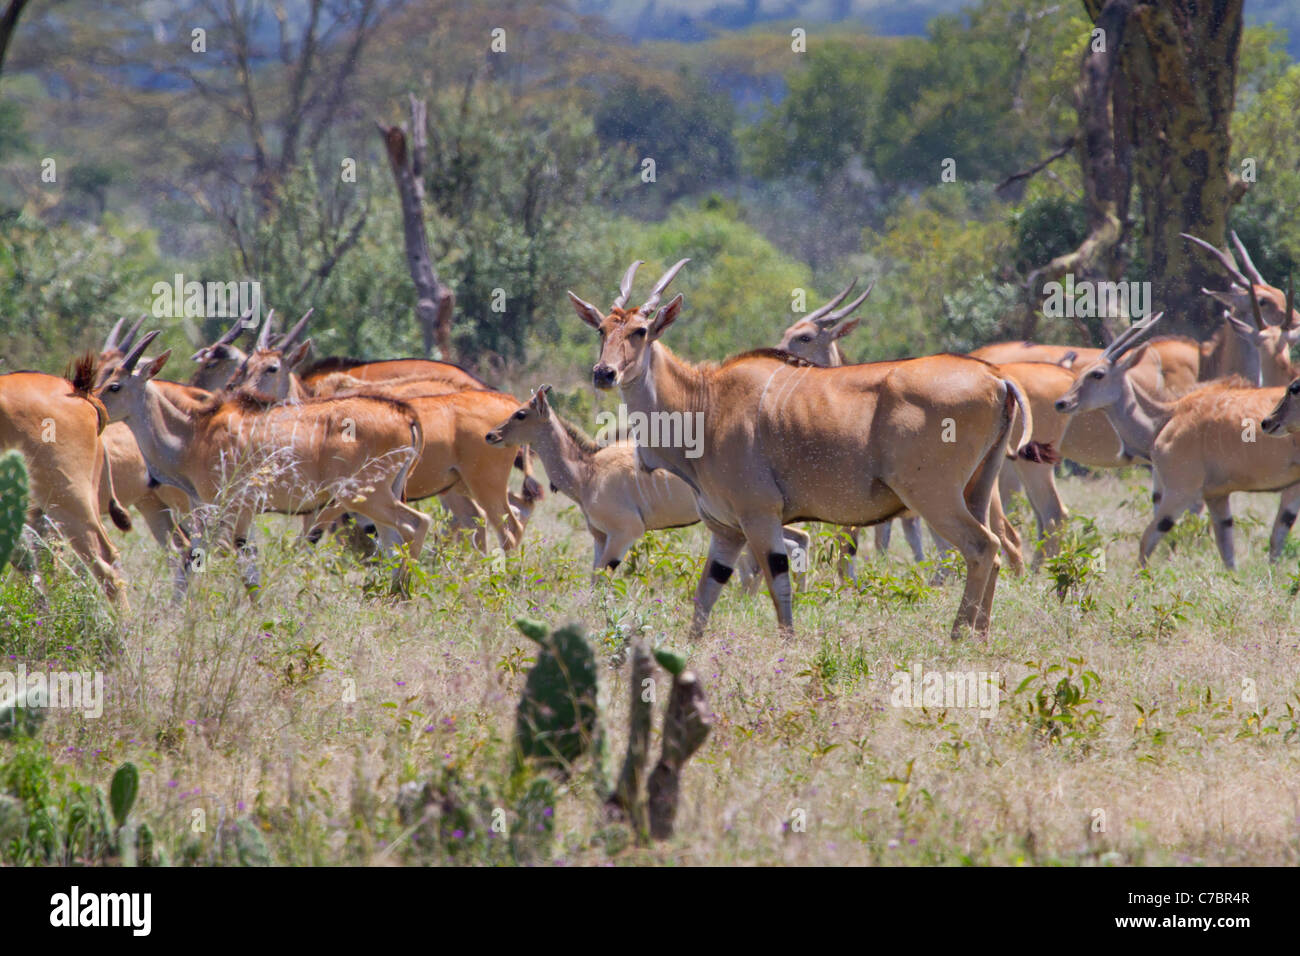 The common eland antelopes (Taurotragus oryx) in the cloud of blood-suckling insects, central Kenya. Stock Photo